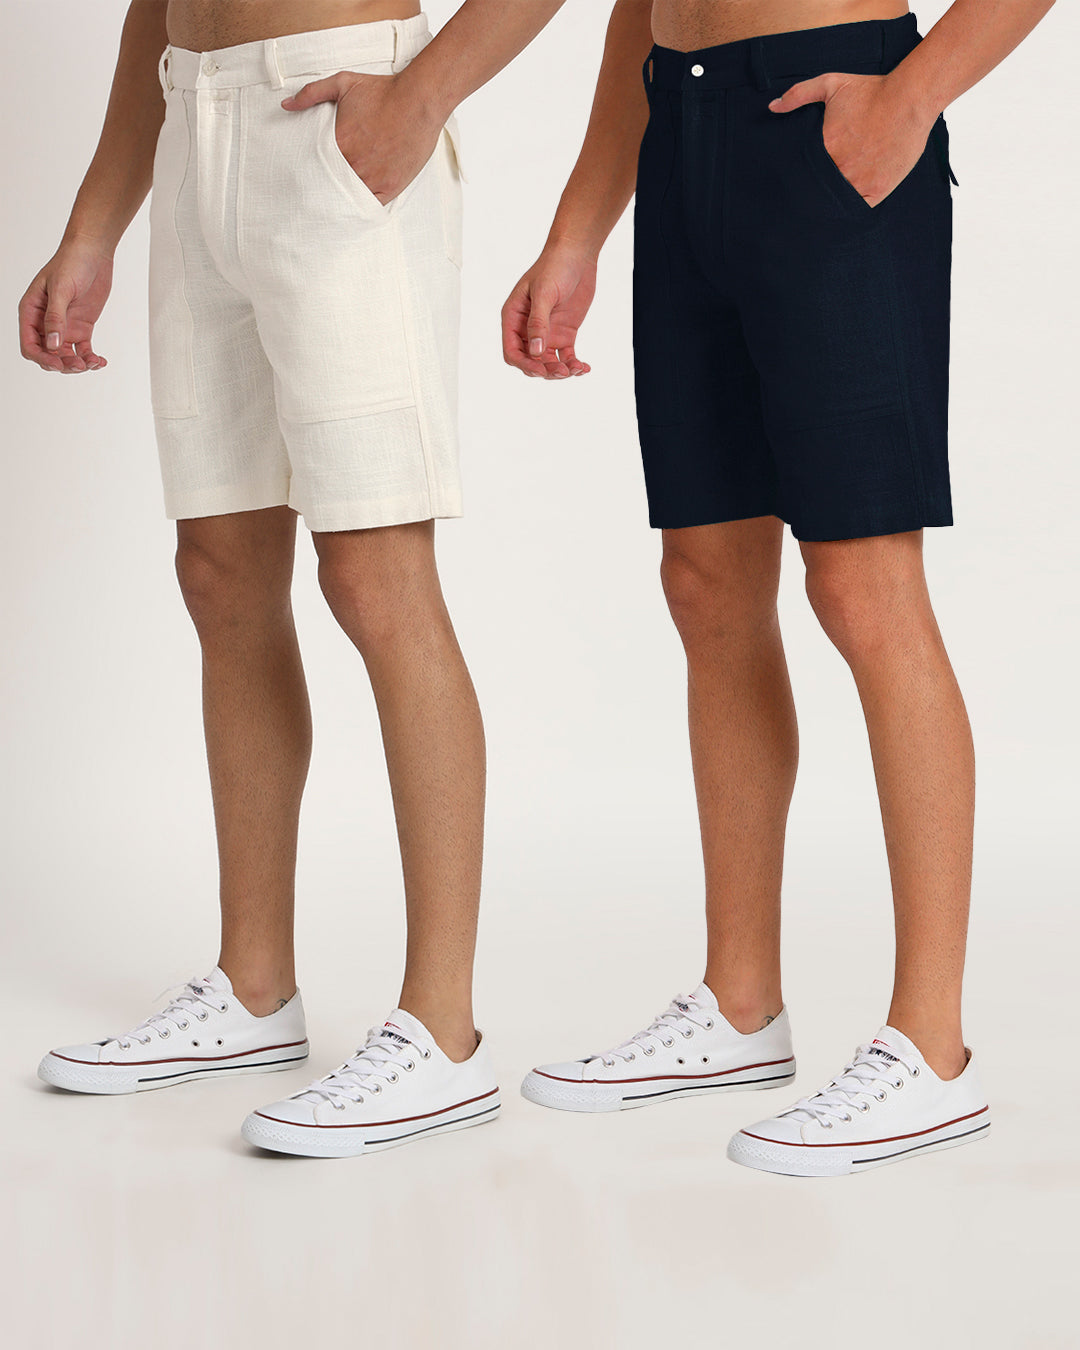 Combo : Patch Pocket Playtime White & Midnight Blue Men's Shorts